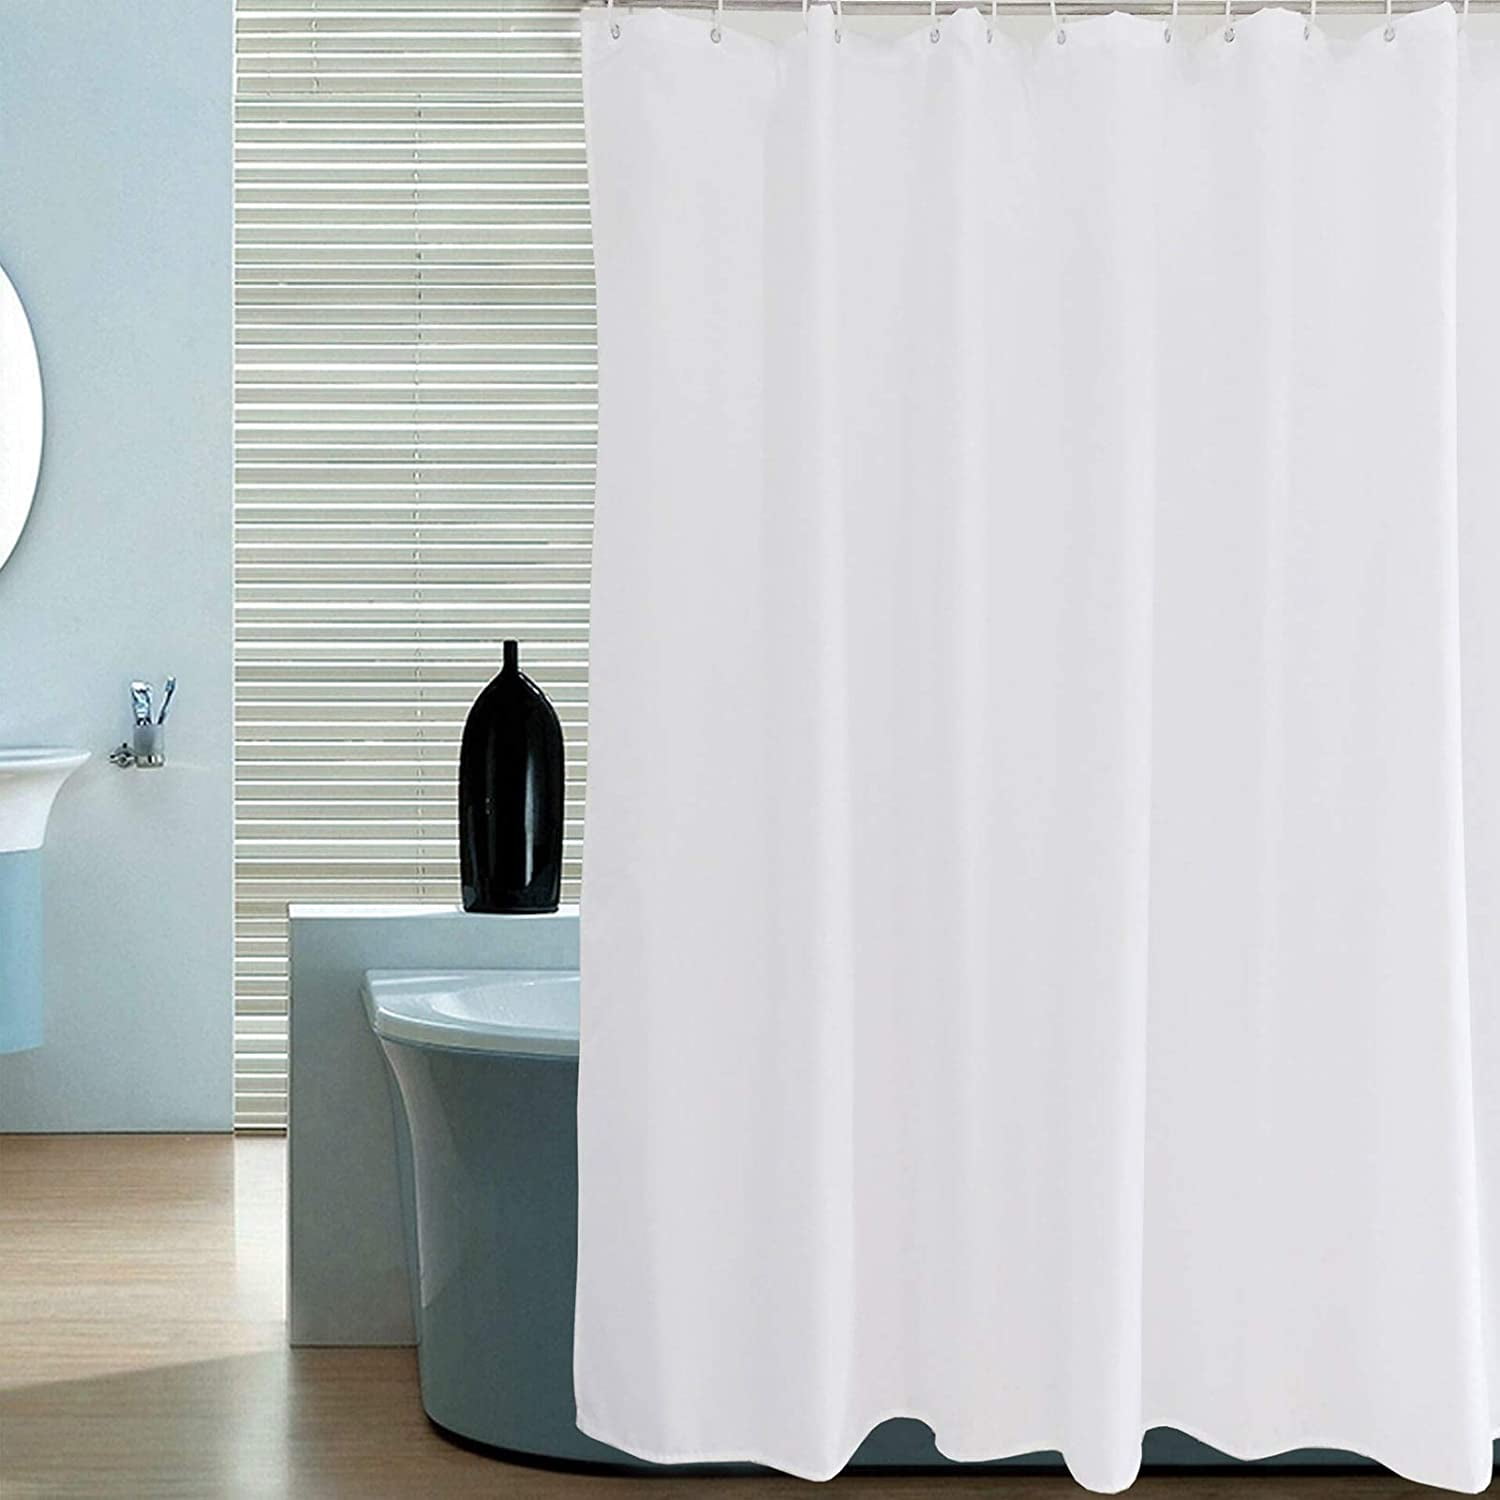 Stall Shower Curtain With Hooks Waterproof Polyester Fabric Plain White 72x72 